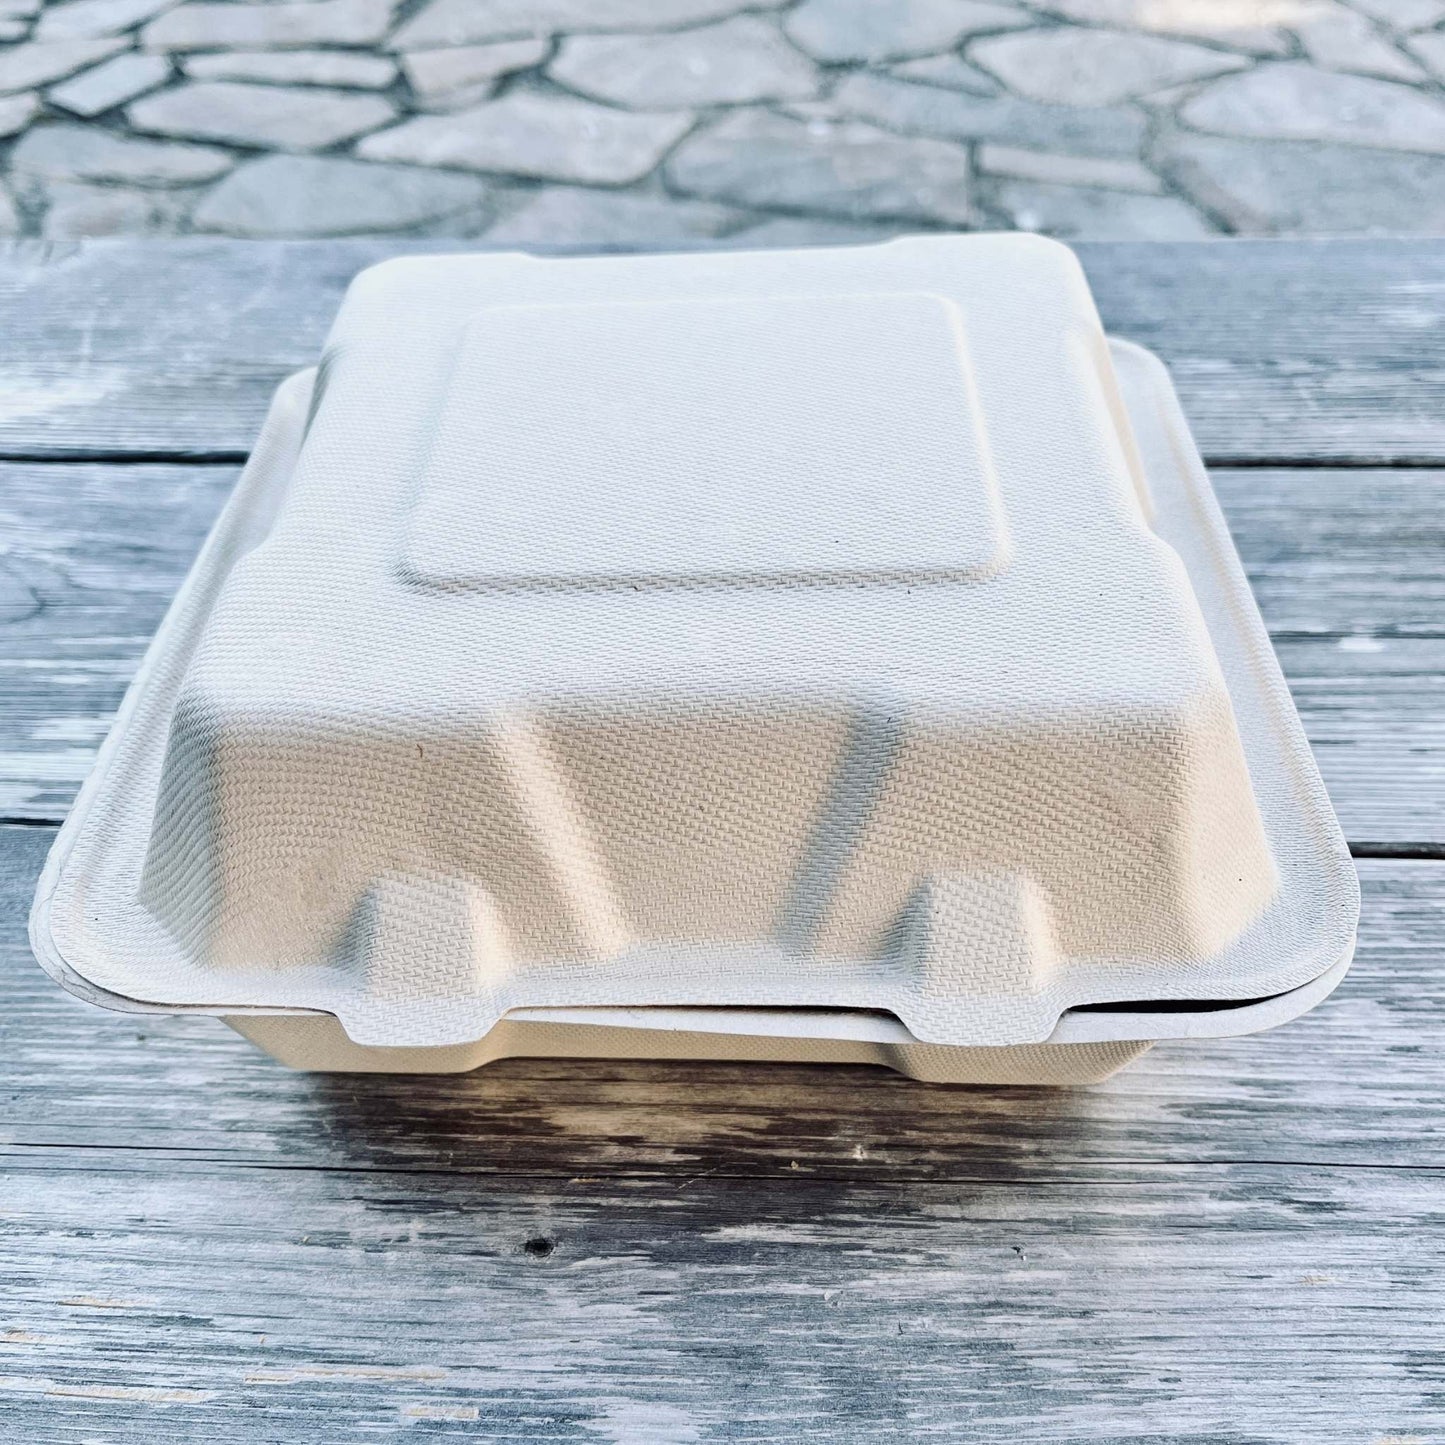 Clamshell 1-compartment container 9"x 9"